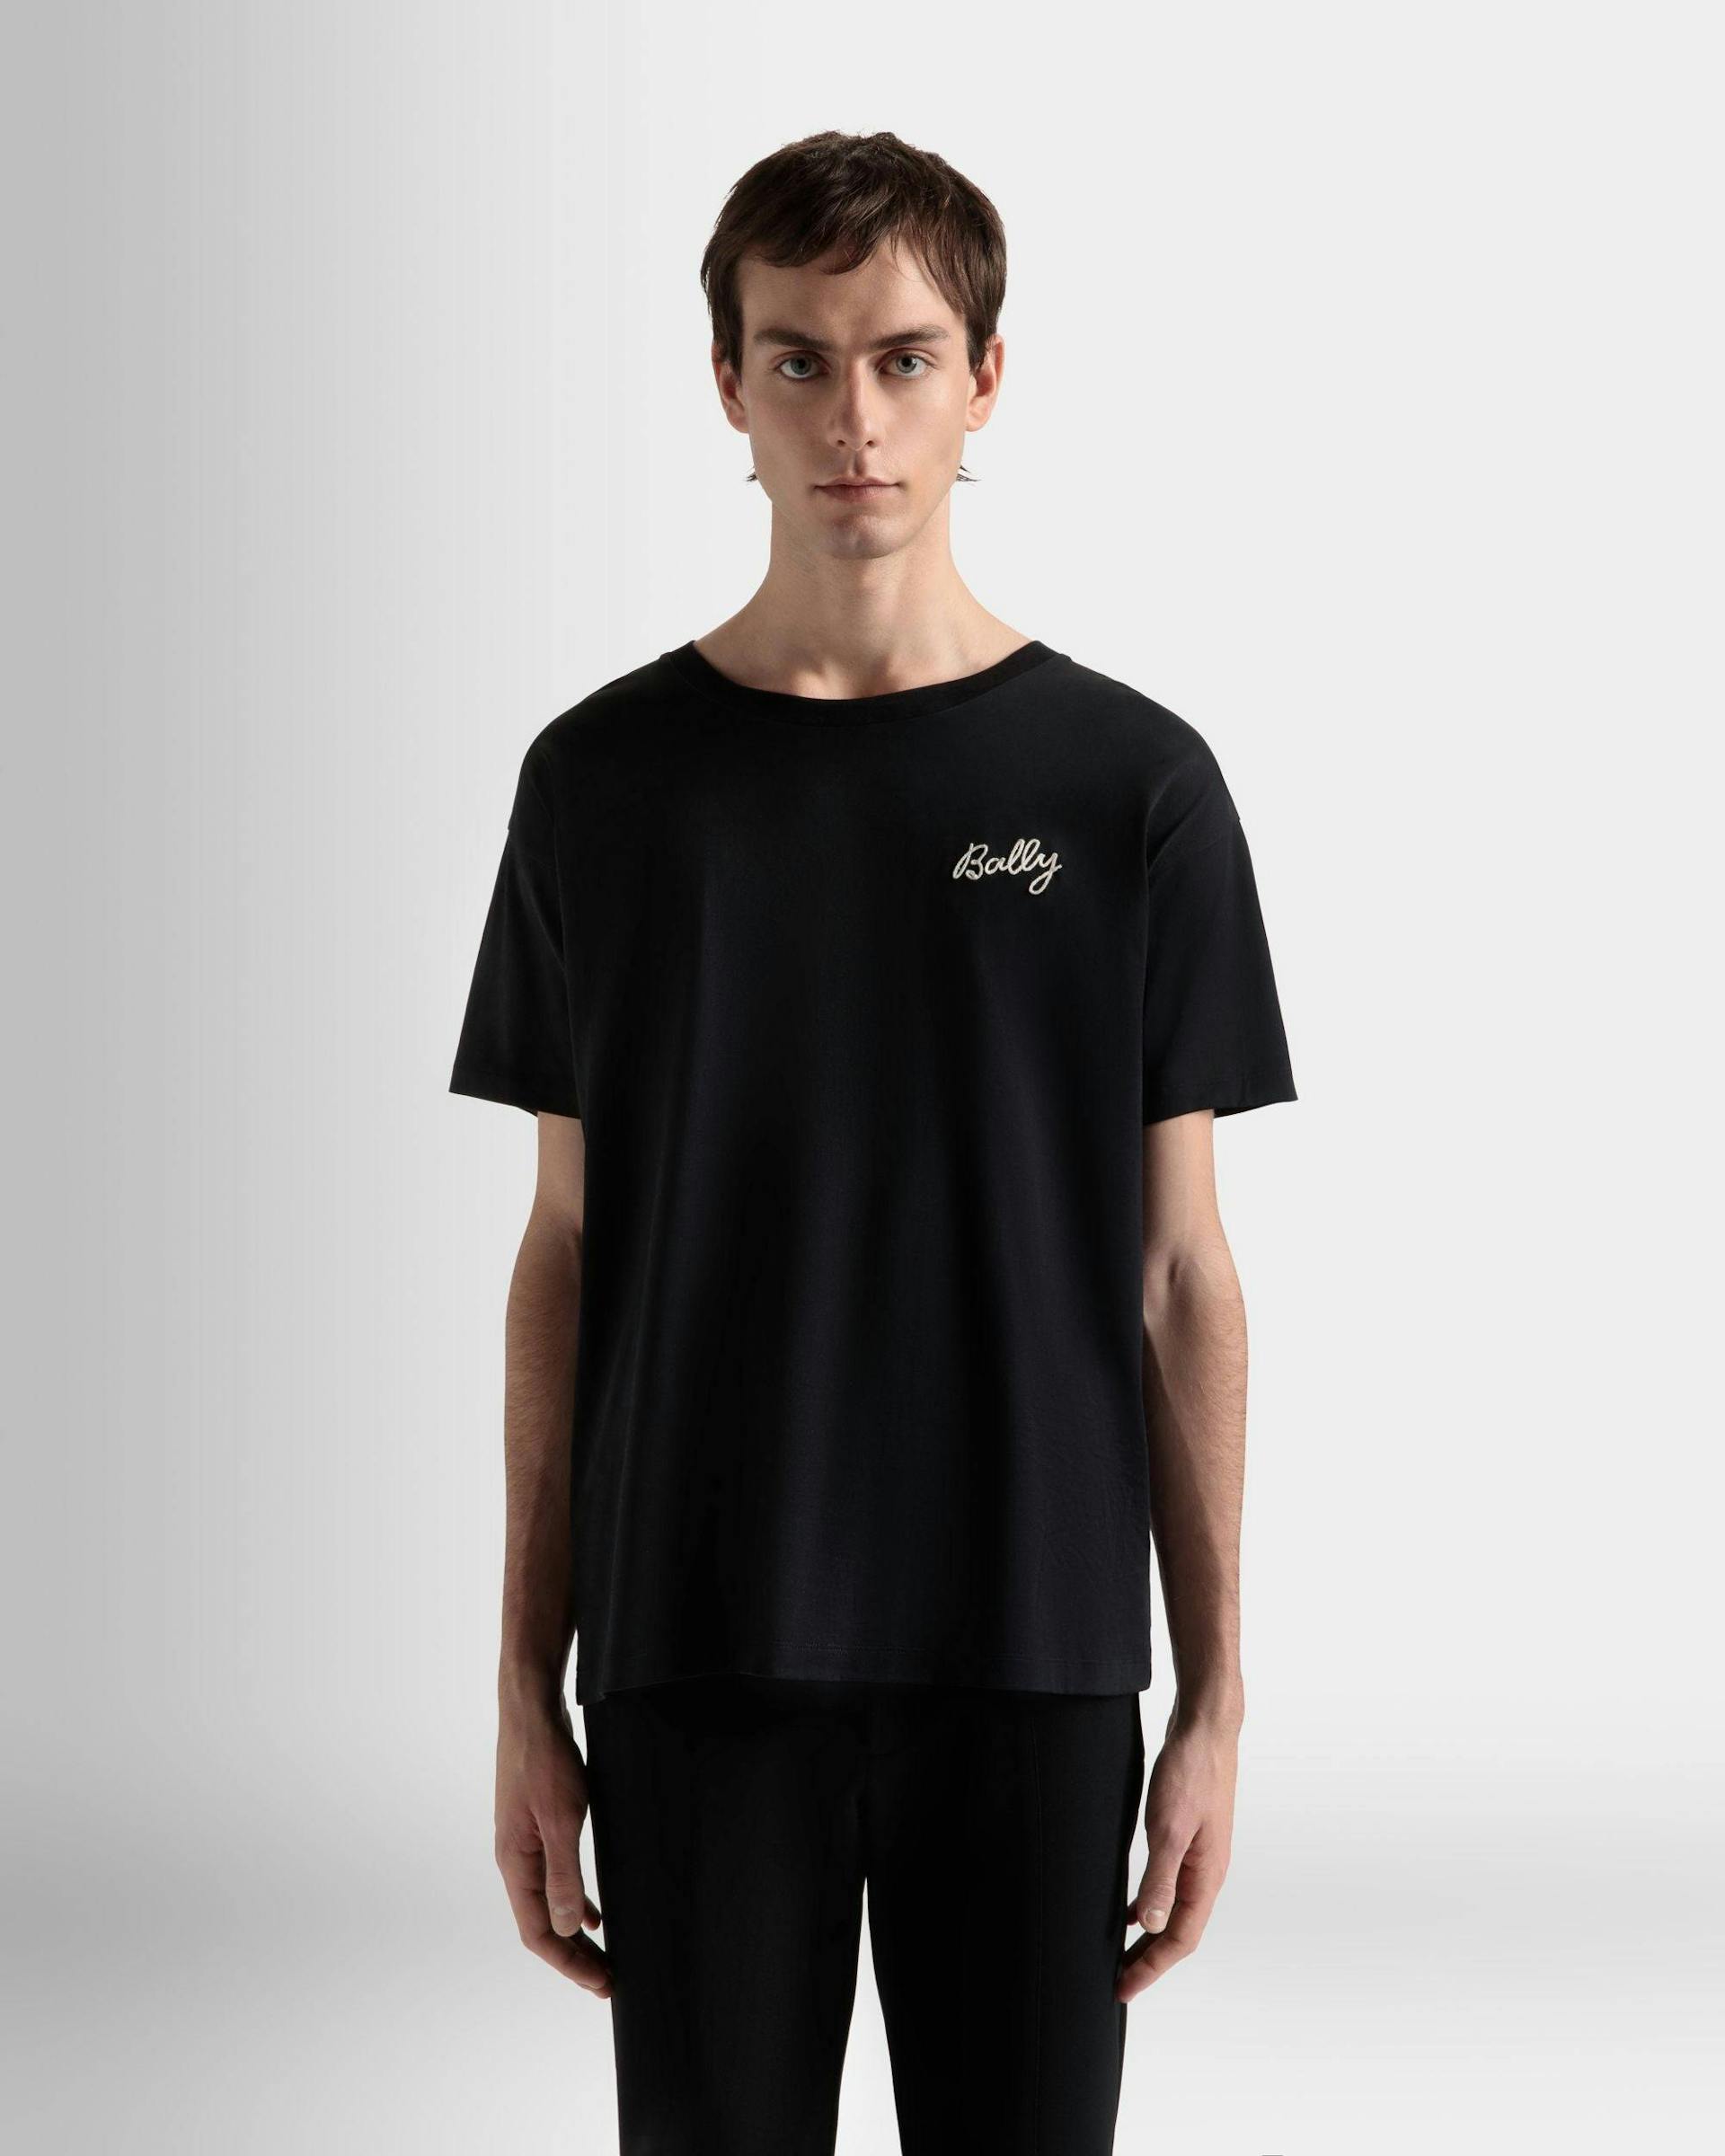 Men's T-Shirt In Black Cotton | Bally | On Model Close Up